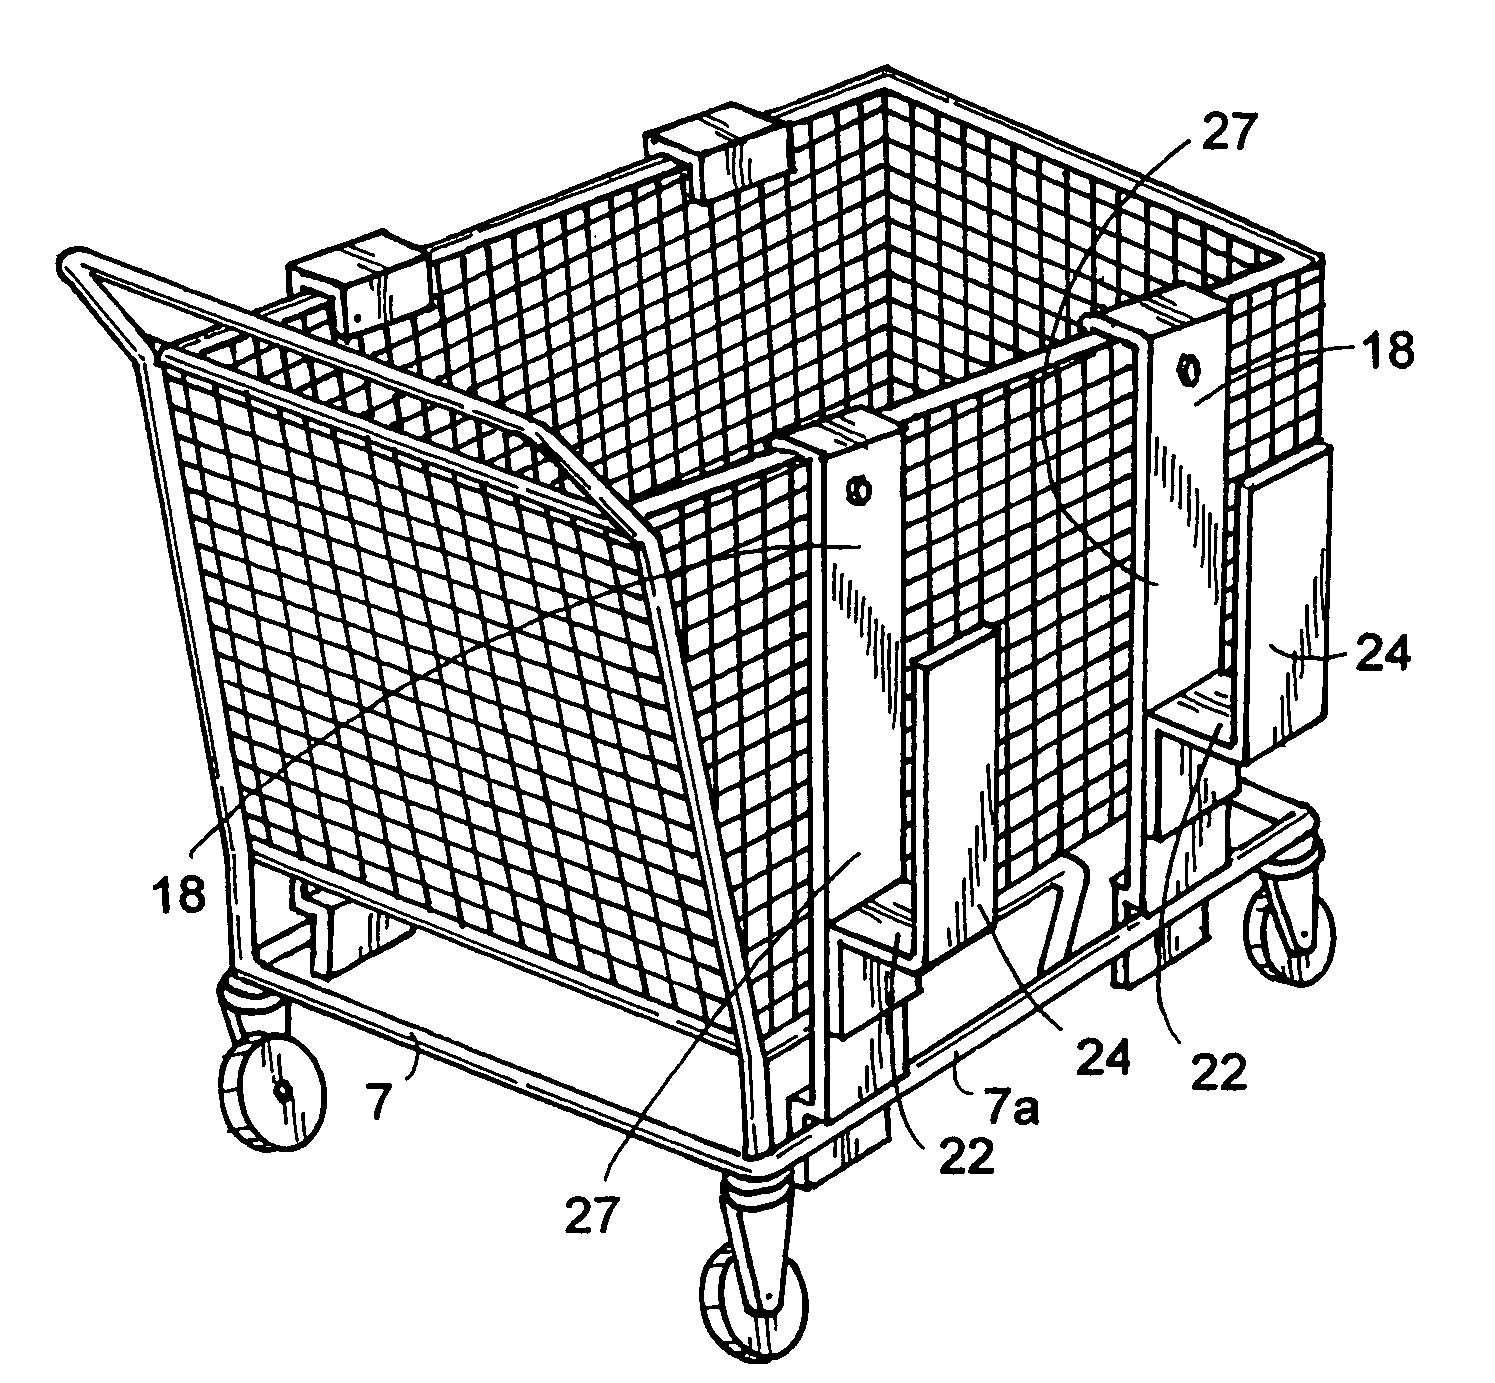 Shopping cart and shopping cart accessory